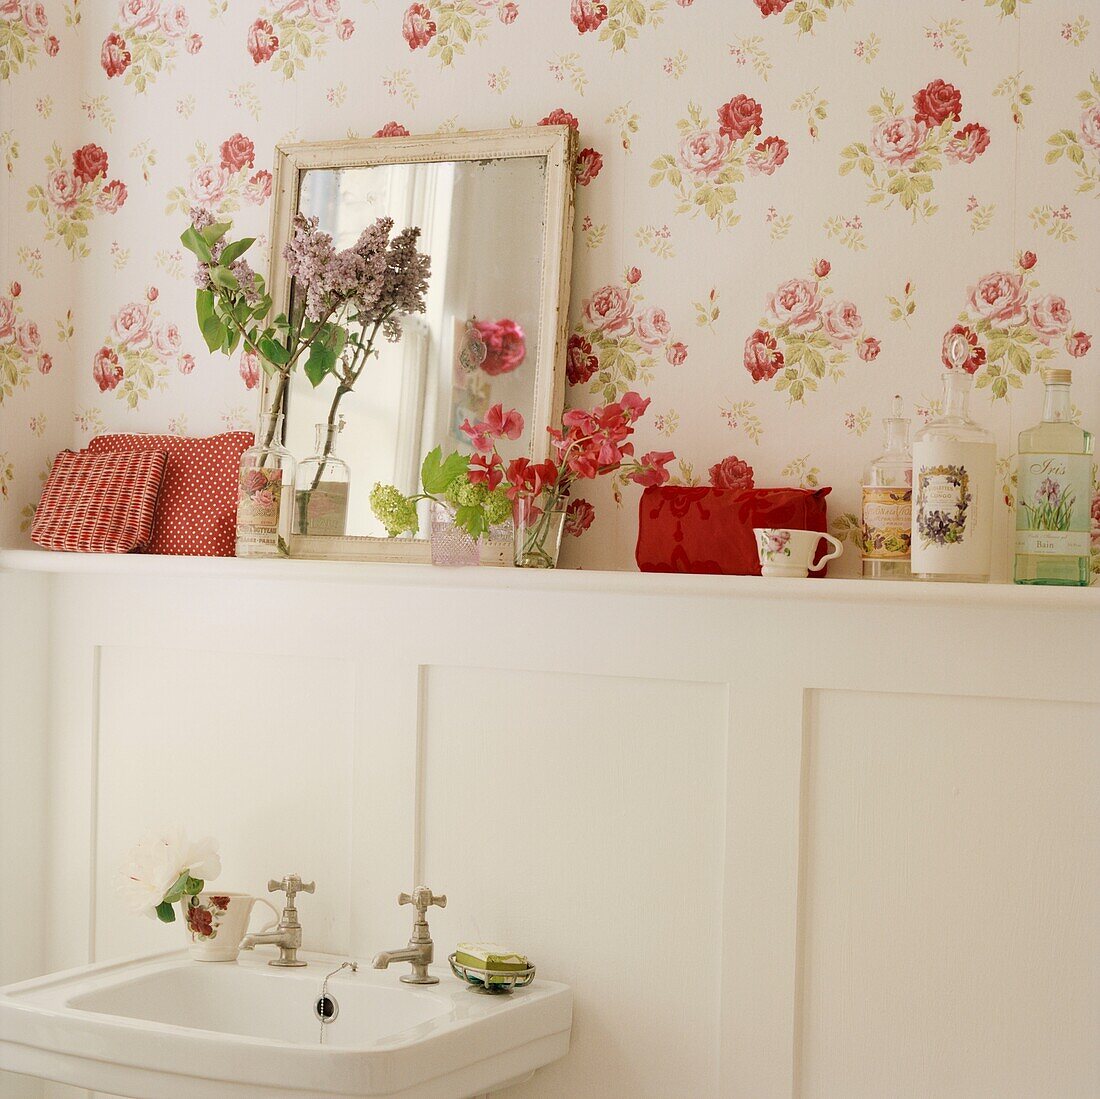 Cut flowers and toiletries on bathroom shelf with floral patterned wallpaper and mirror